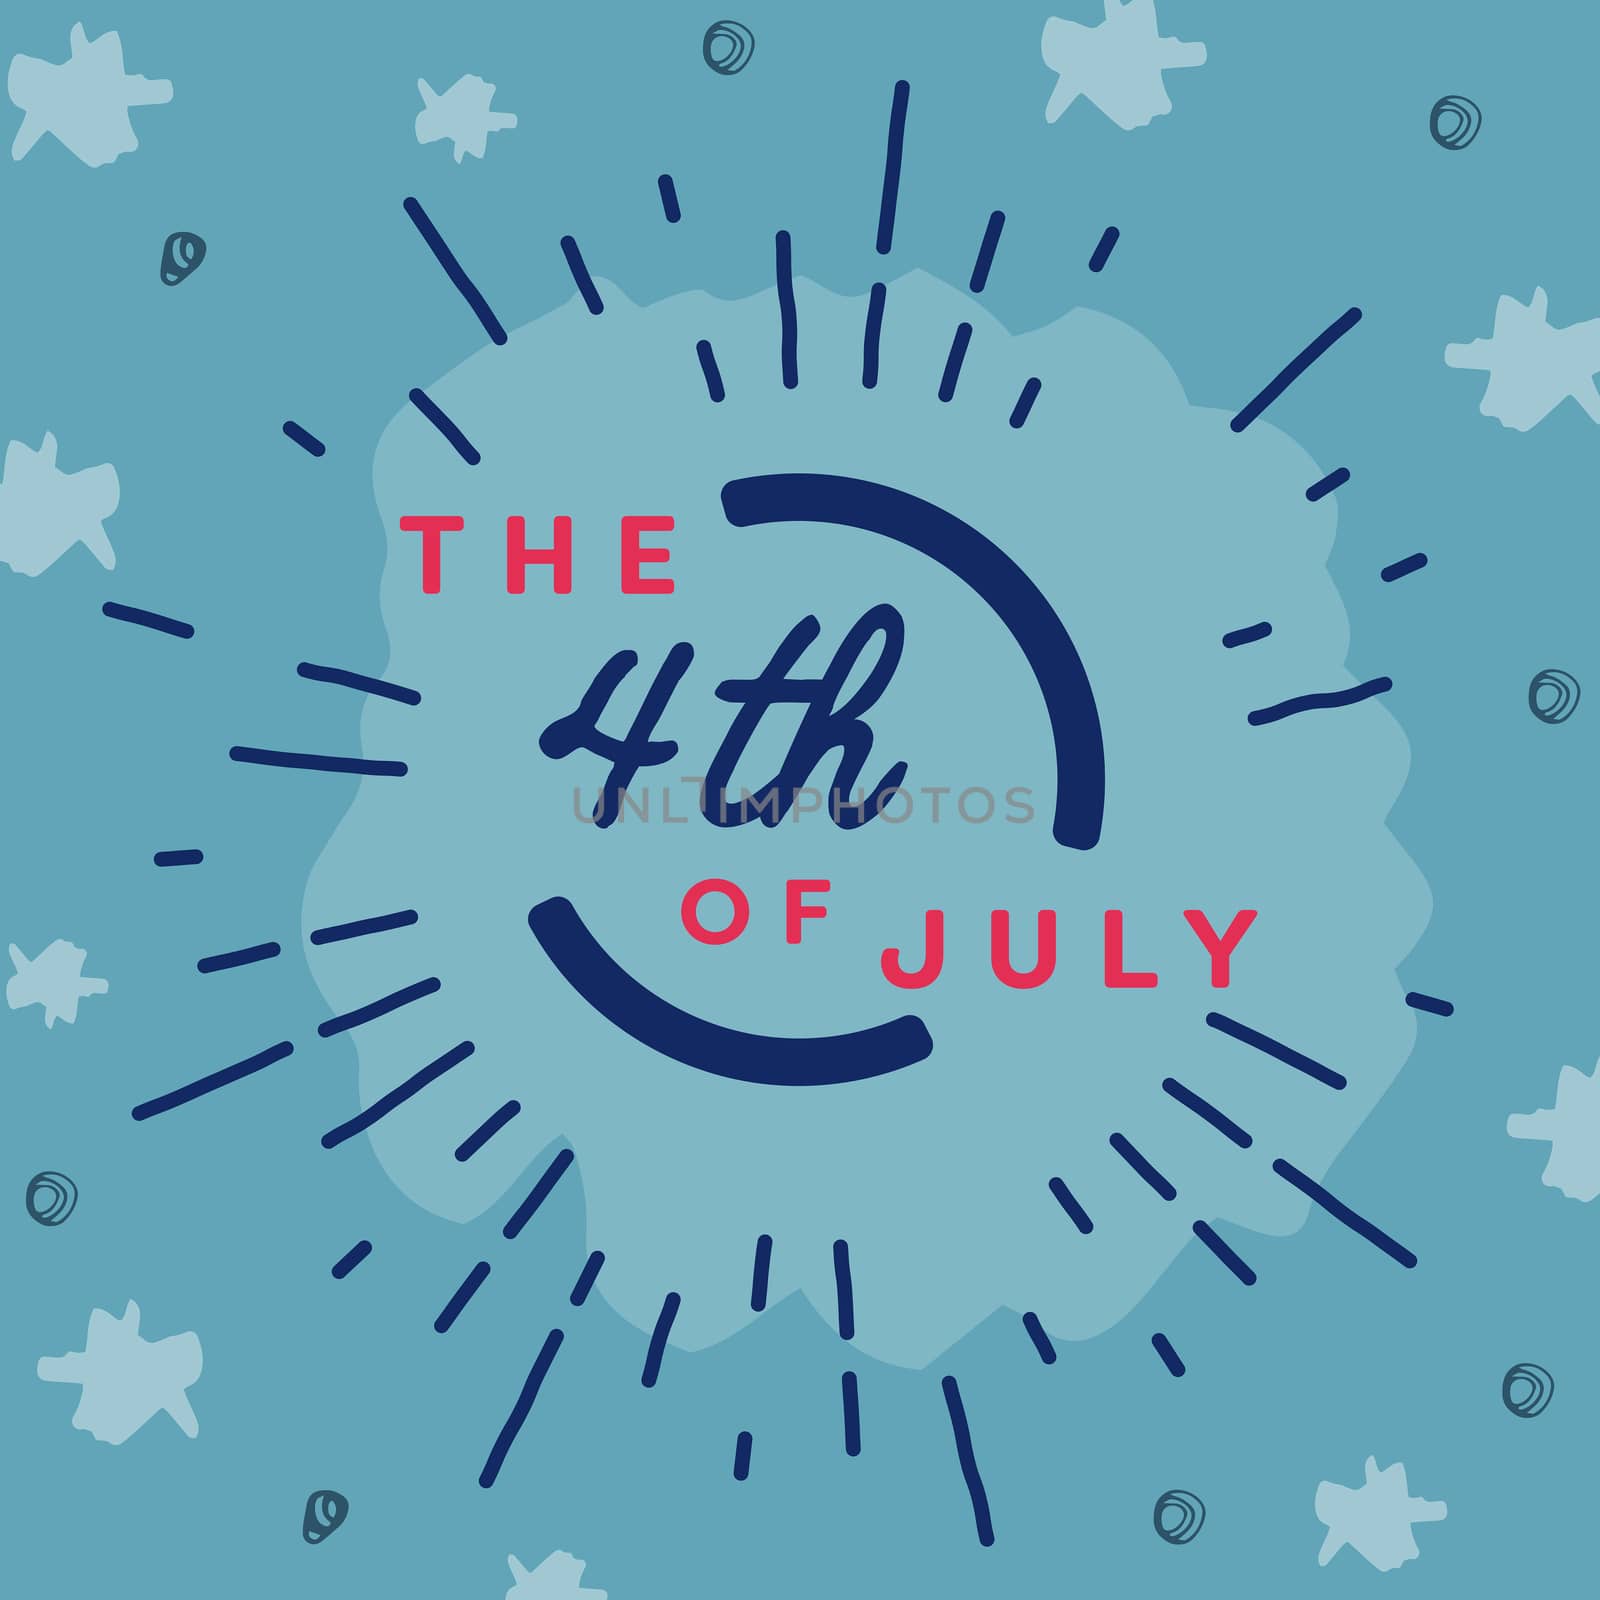 Greeting card with fourth of july message by Wavebreakmedia